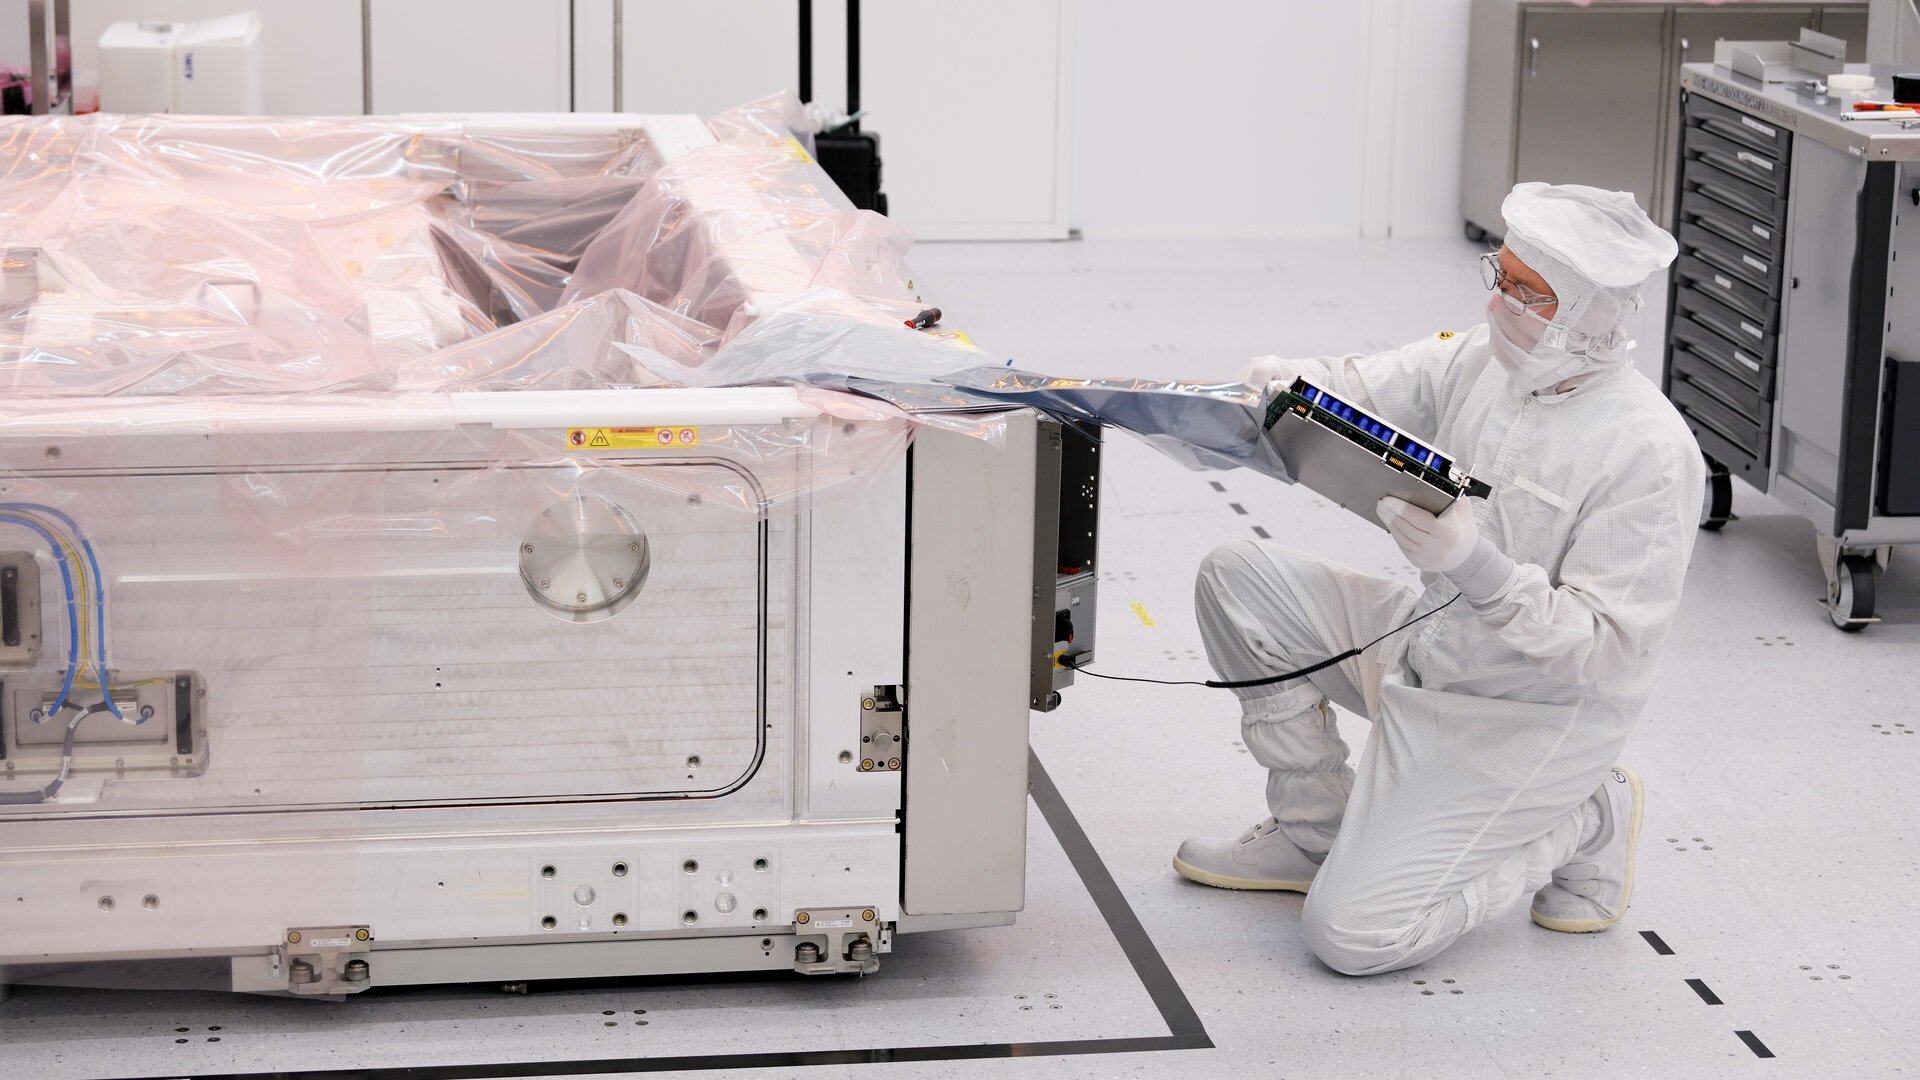 A person in a cleanroom dismantles wafer stage for re-use.